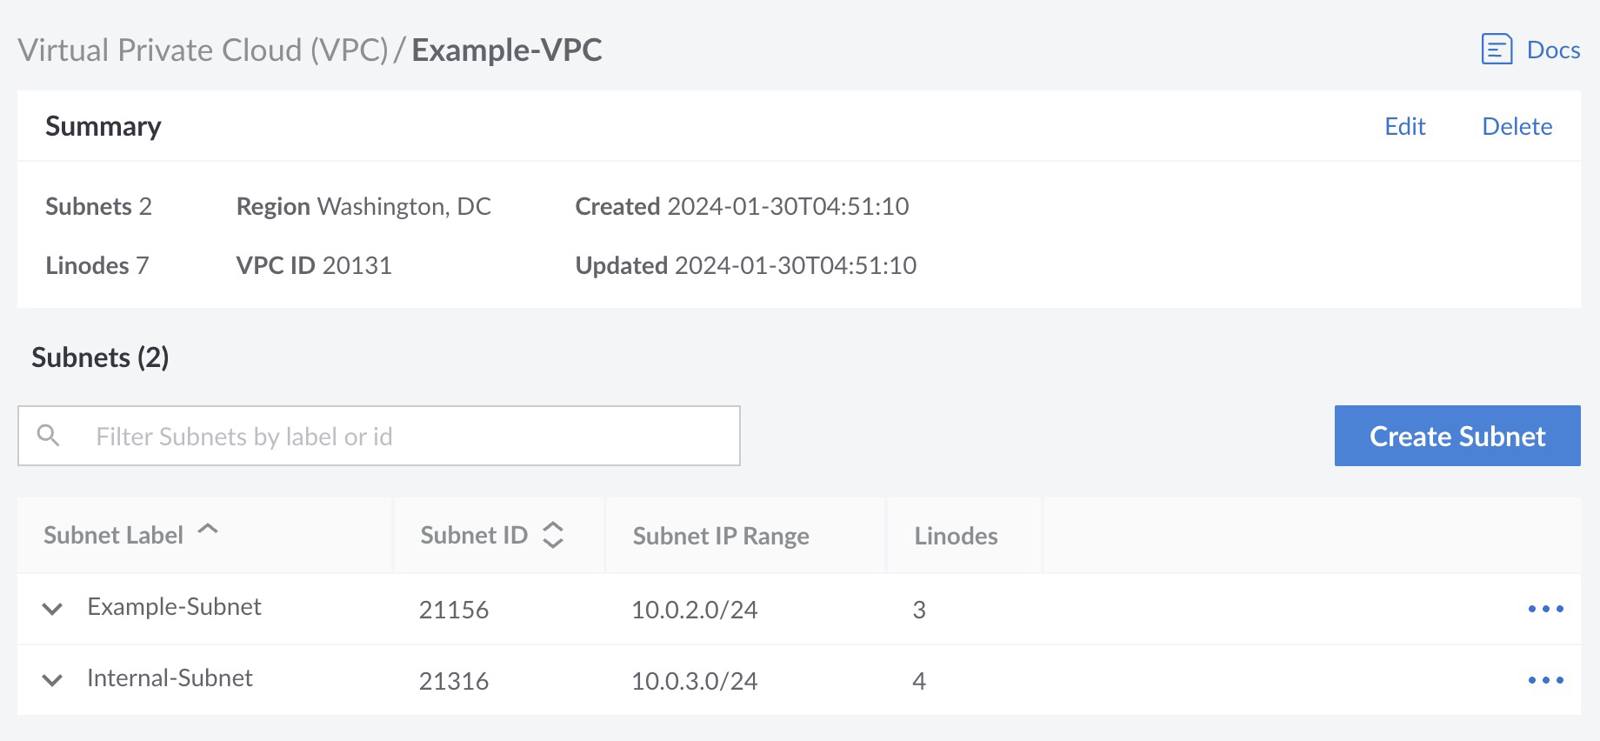 Screenshot of the VPC summary in the Cloud Manager